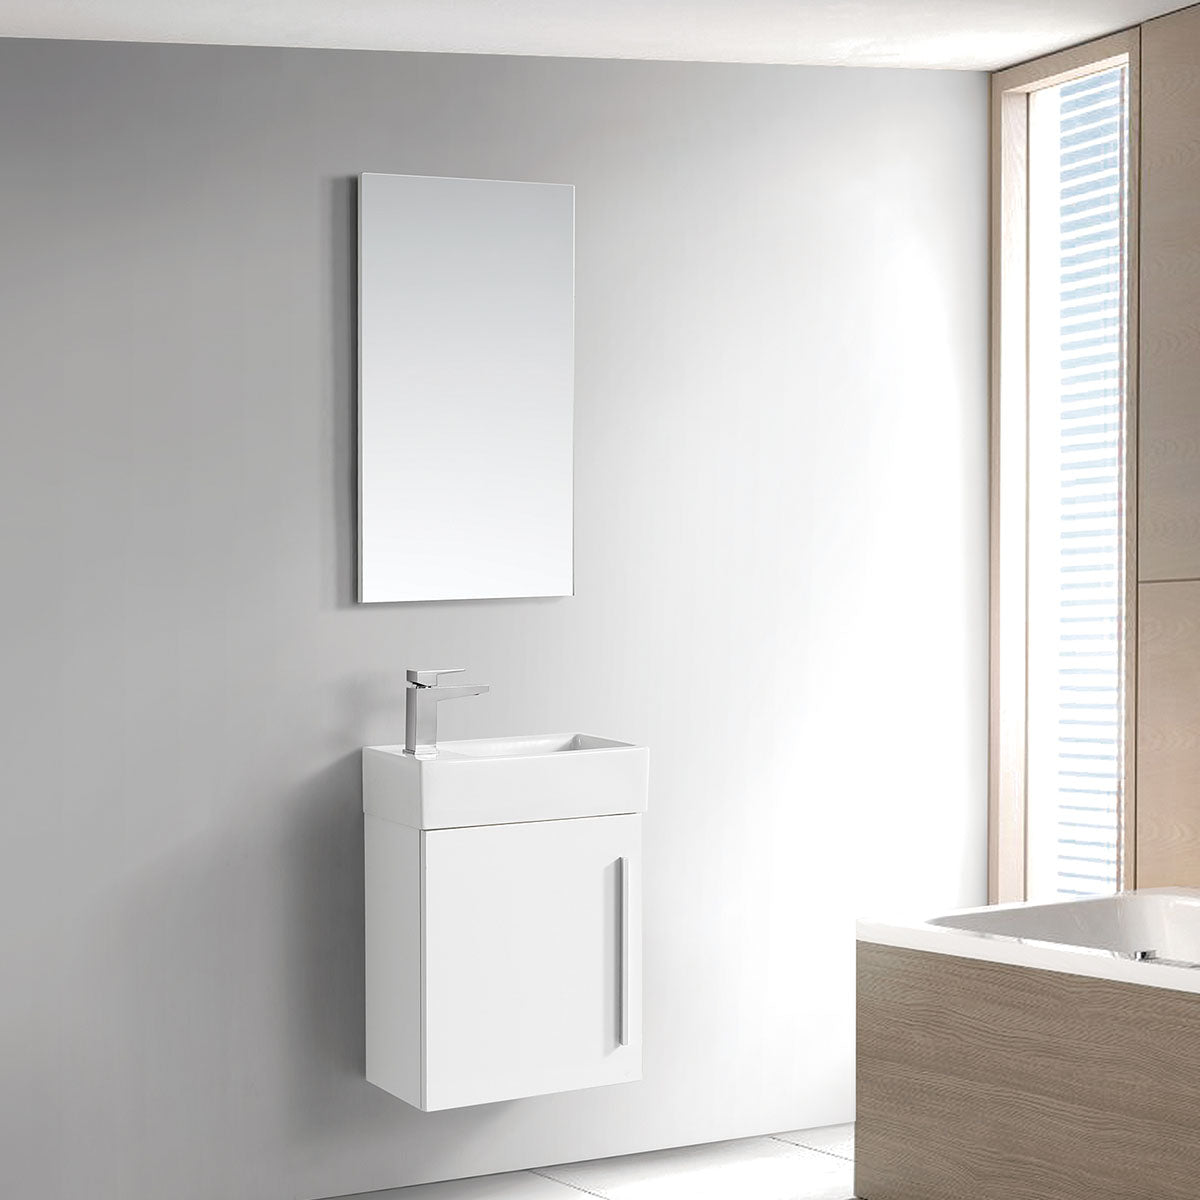 18" Libra Wall Hung Vanity with Ceramic Sink combo (Glossy White) V9001 Series - iStyle Bath